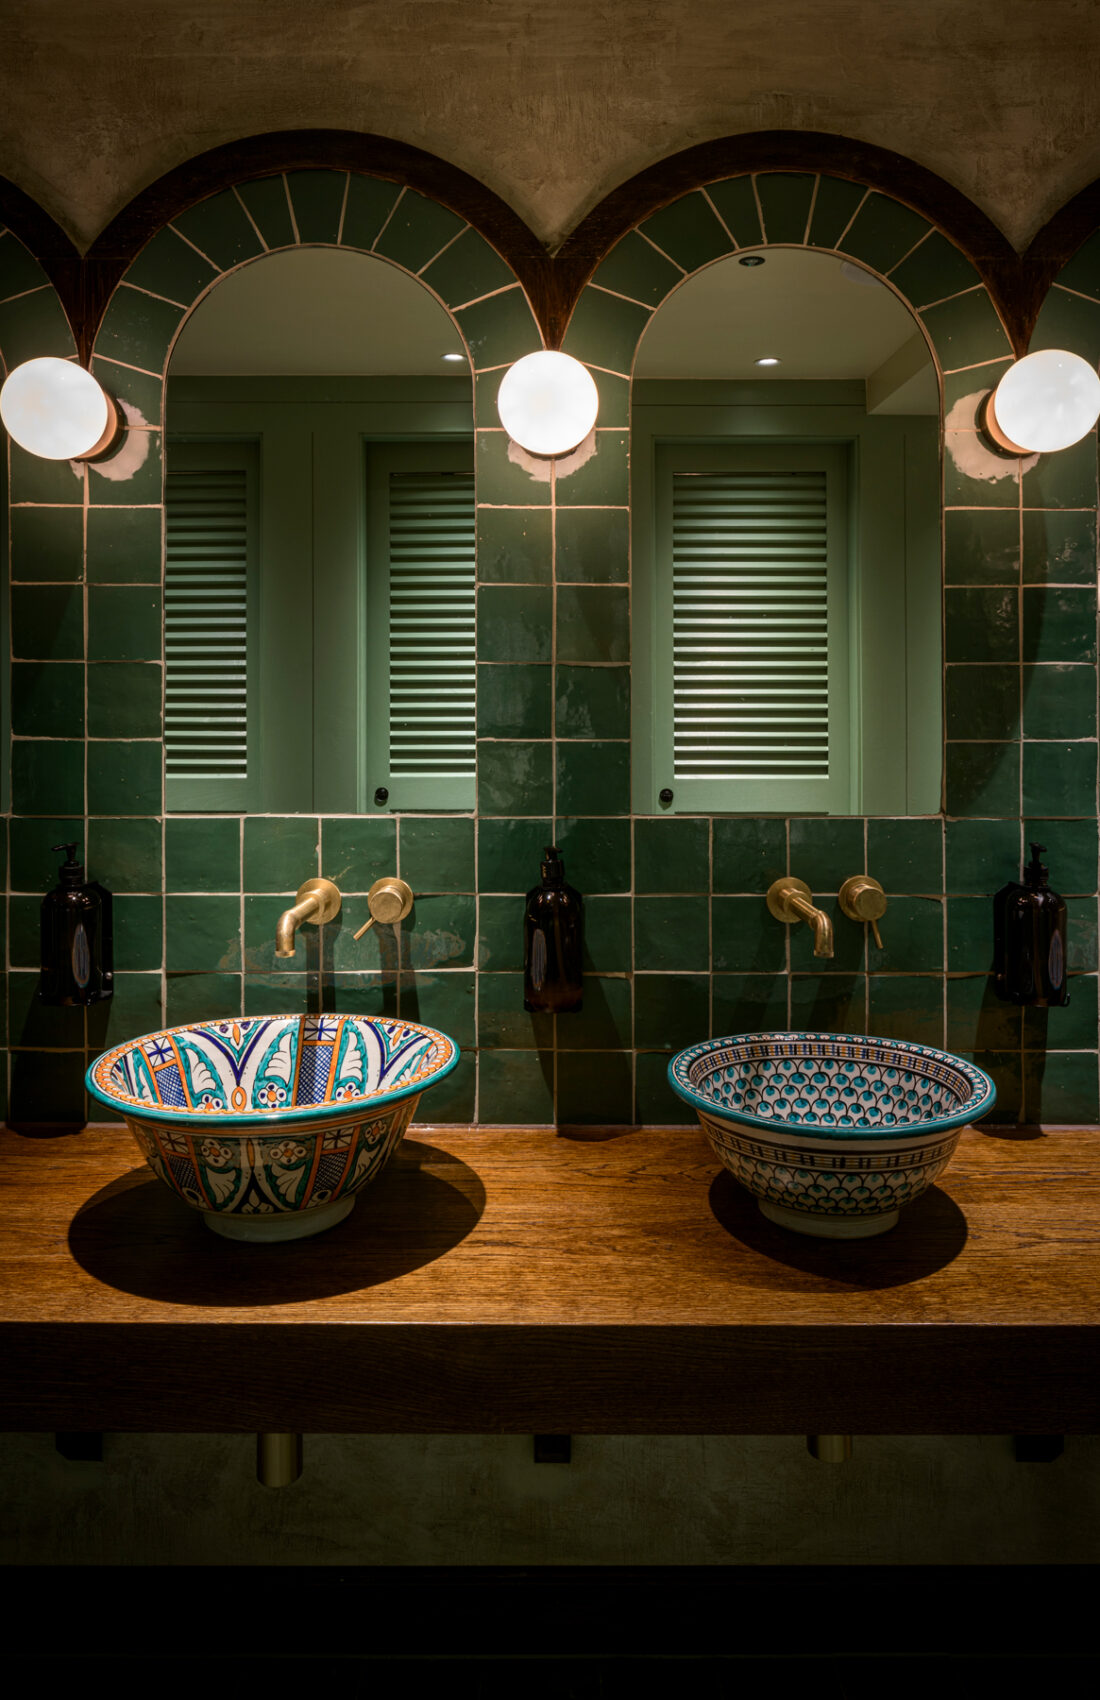 Green bathroom toilet tiles with arched mirrors, reclaimed hand painted porcelain sinks on wooden table top inside Good's Way music venue and events space in King's Cross, London, designed by 3Stories Interior Design and Branding creative agency.